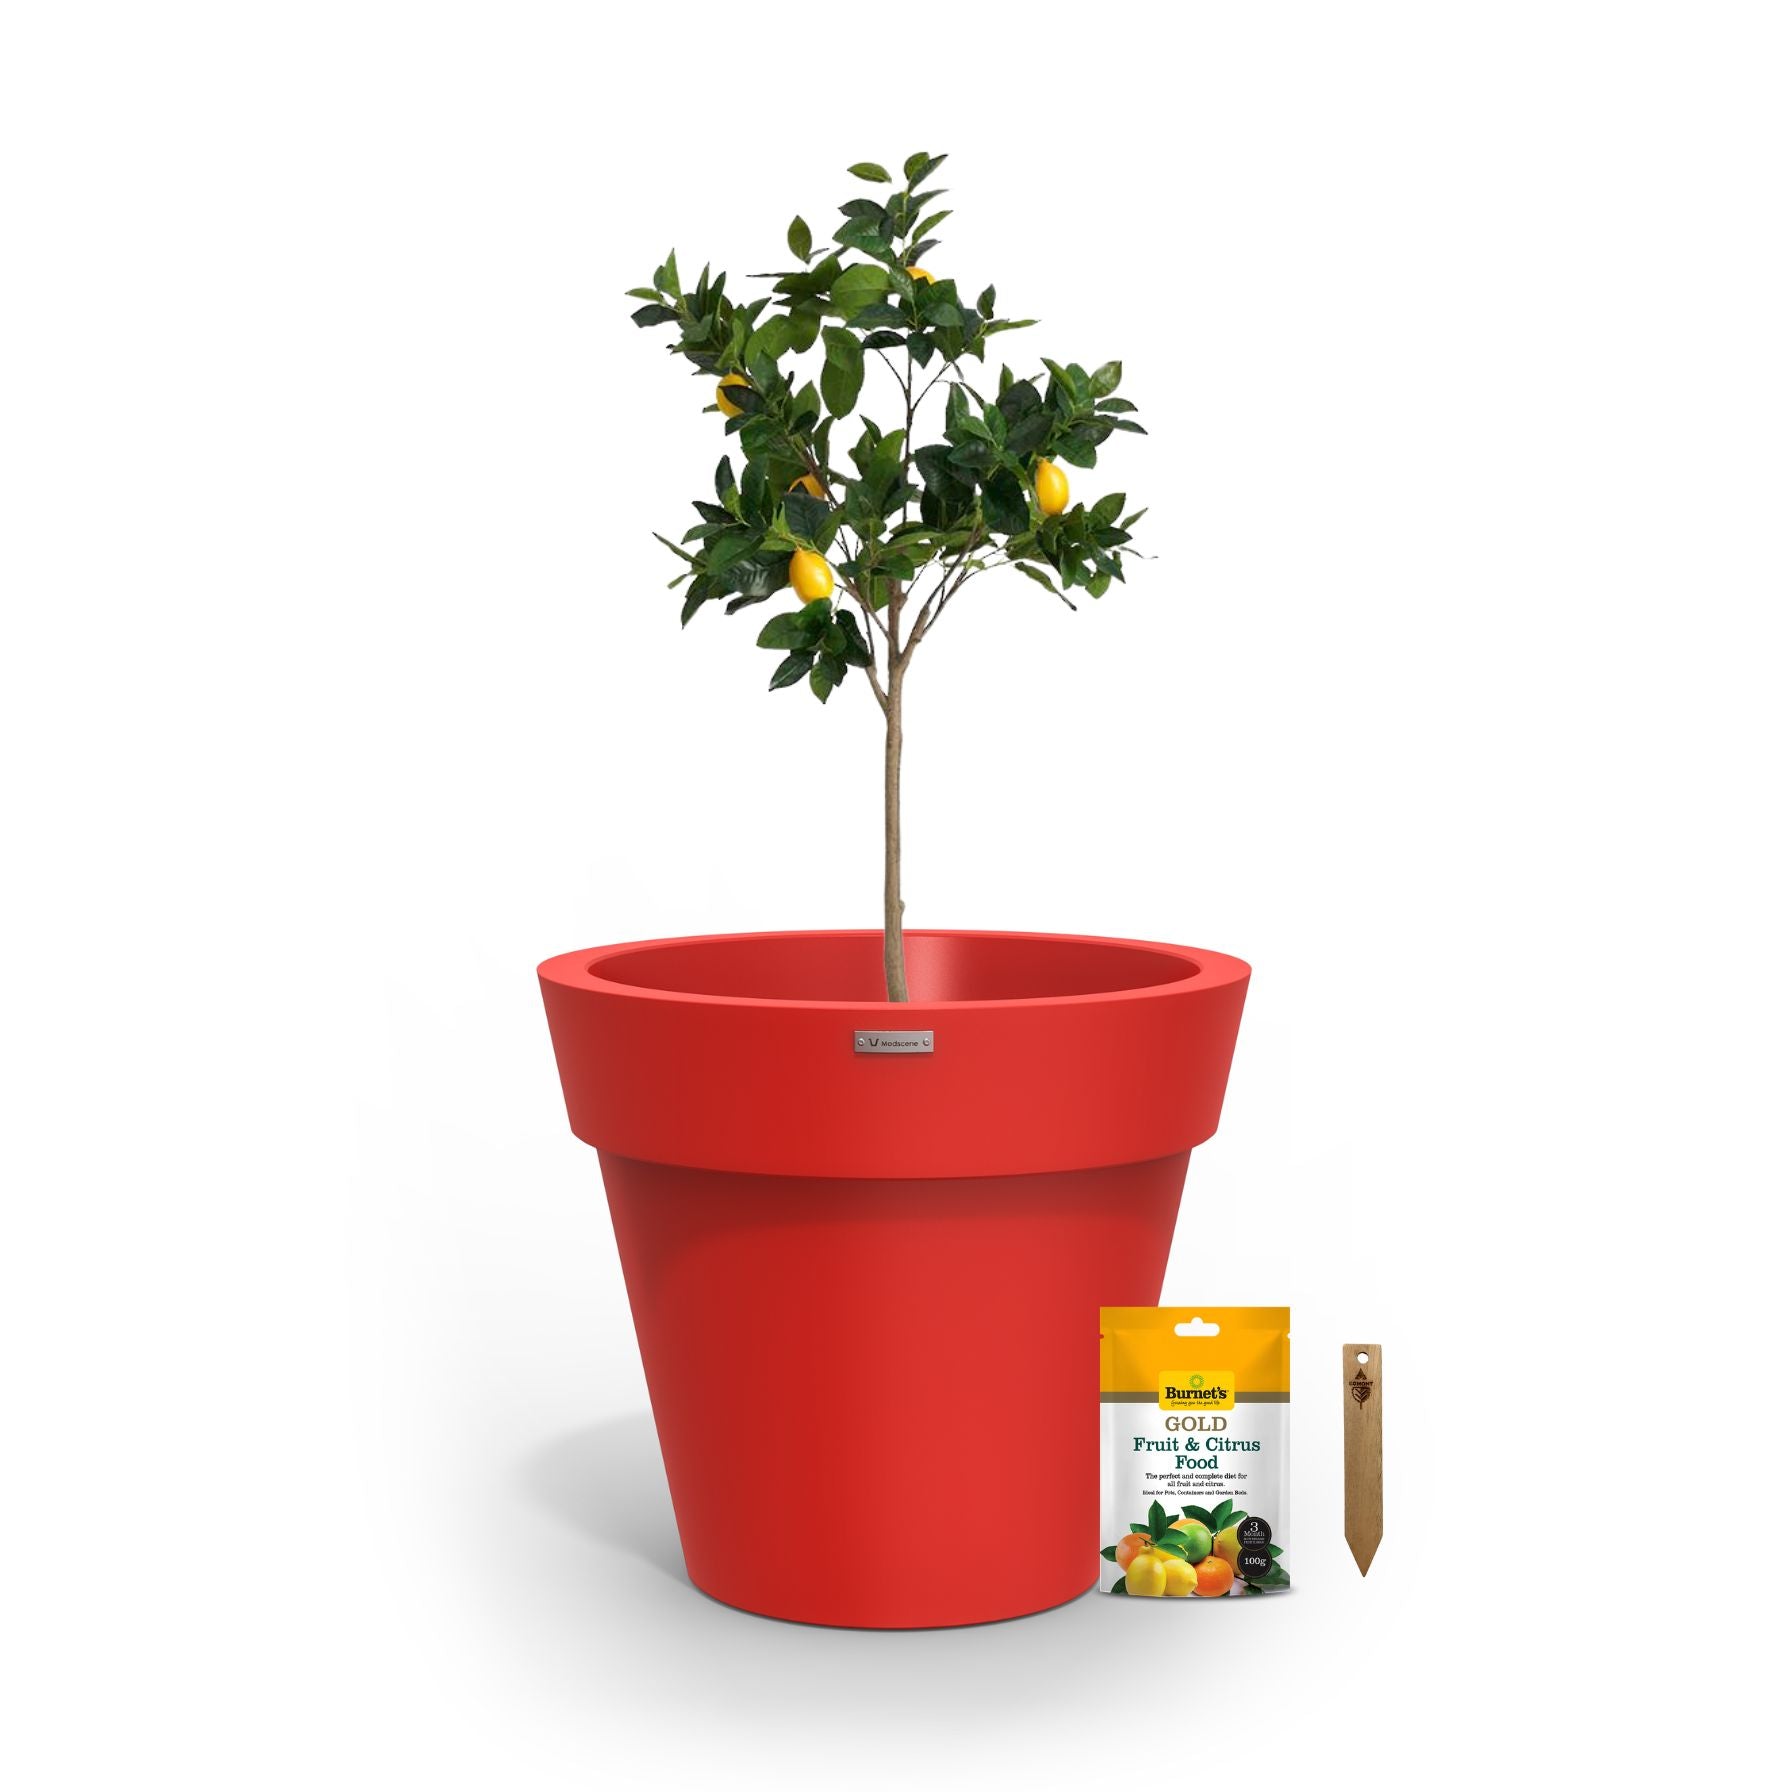 A lemon tree in a red planter pot.